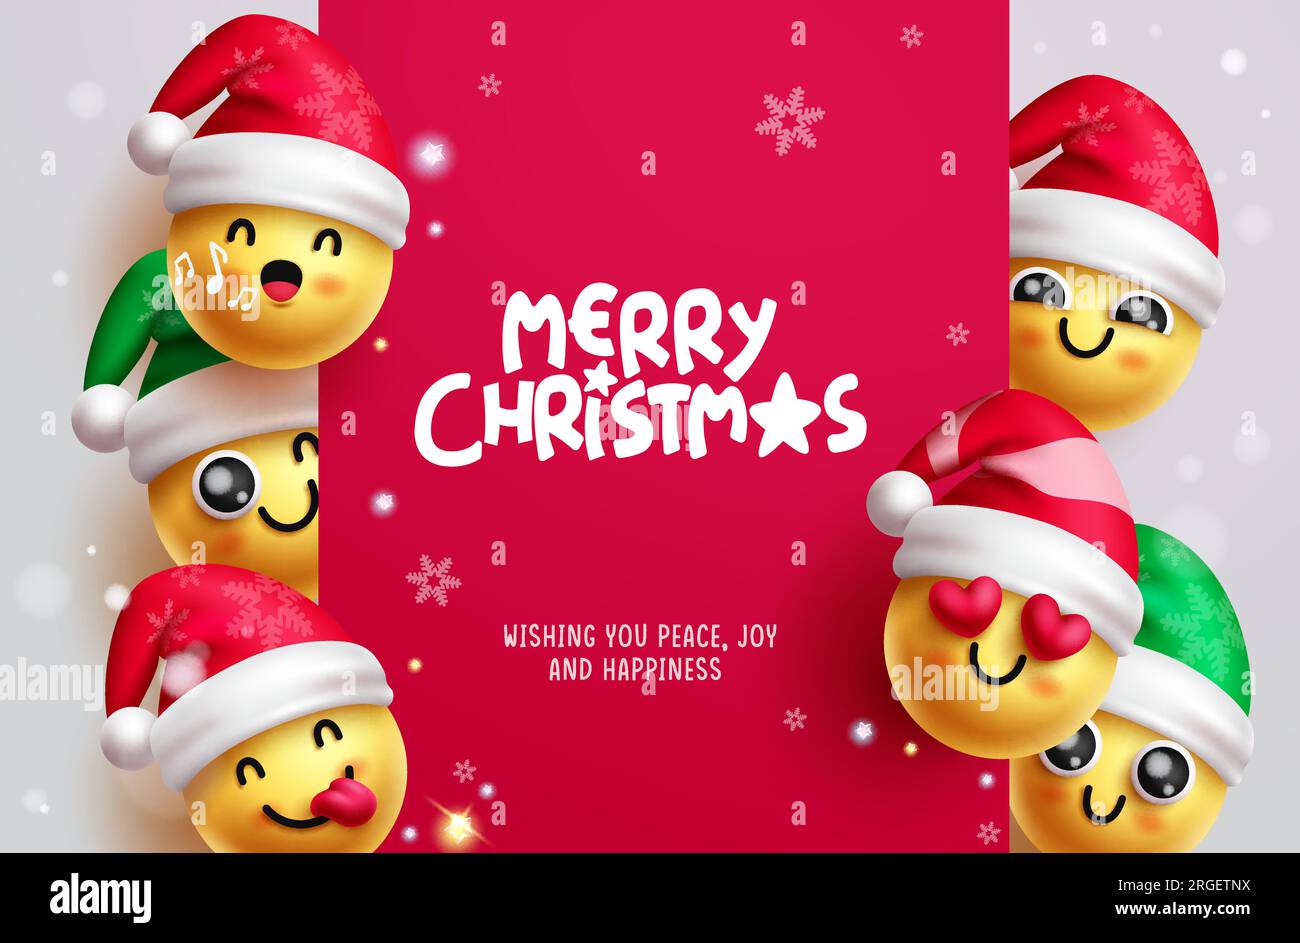 Merry christmas text vector template design. Christmas emojis, emoticons and characters in yellow color for xmas season greeting card. Vector Stock Vector